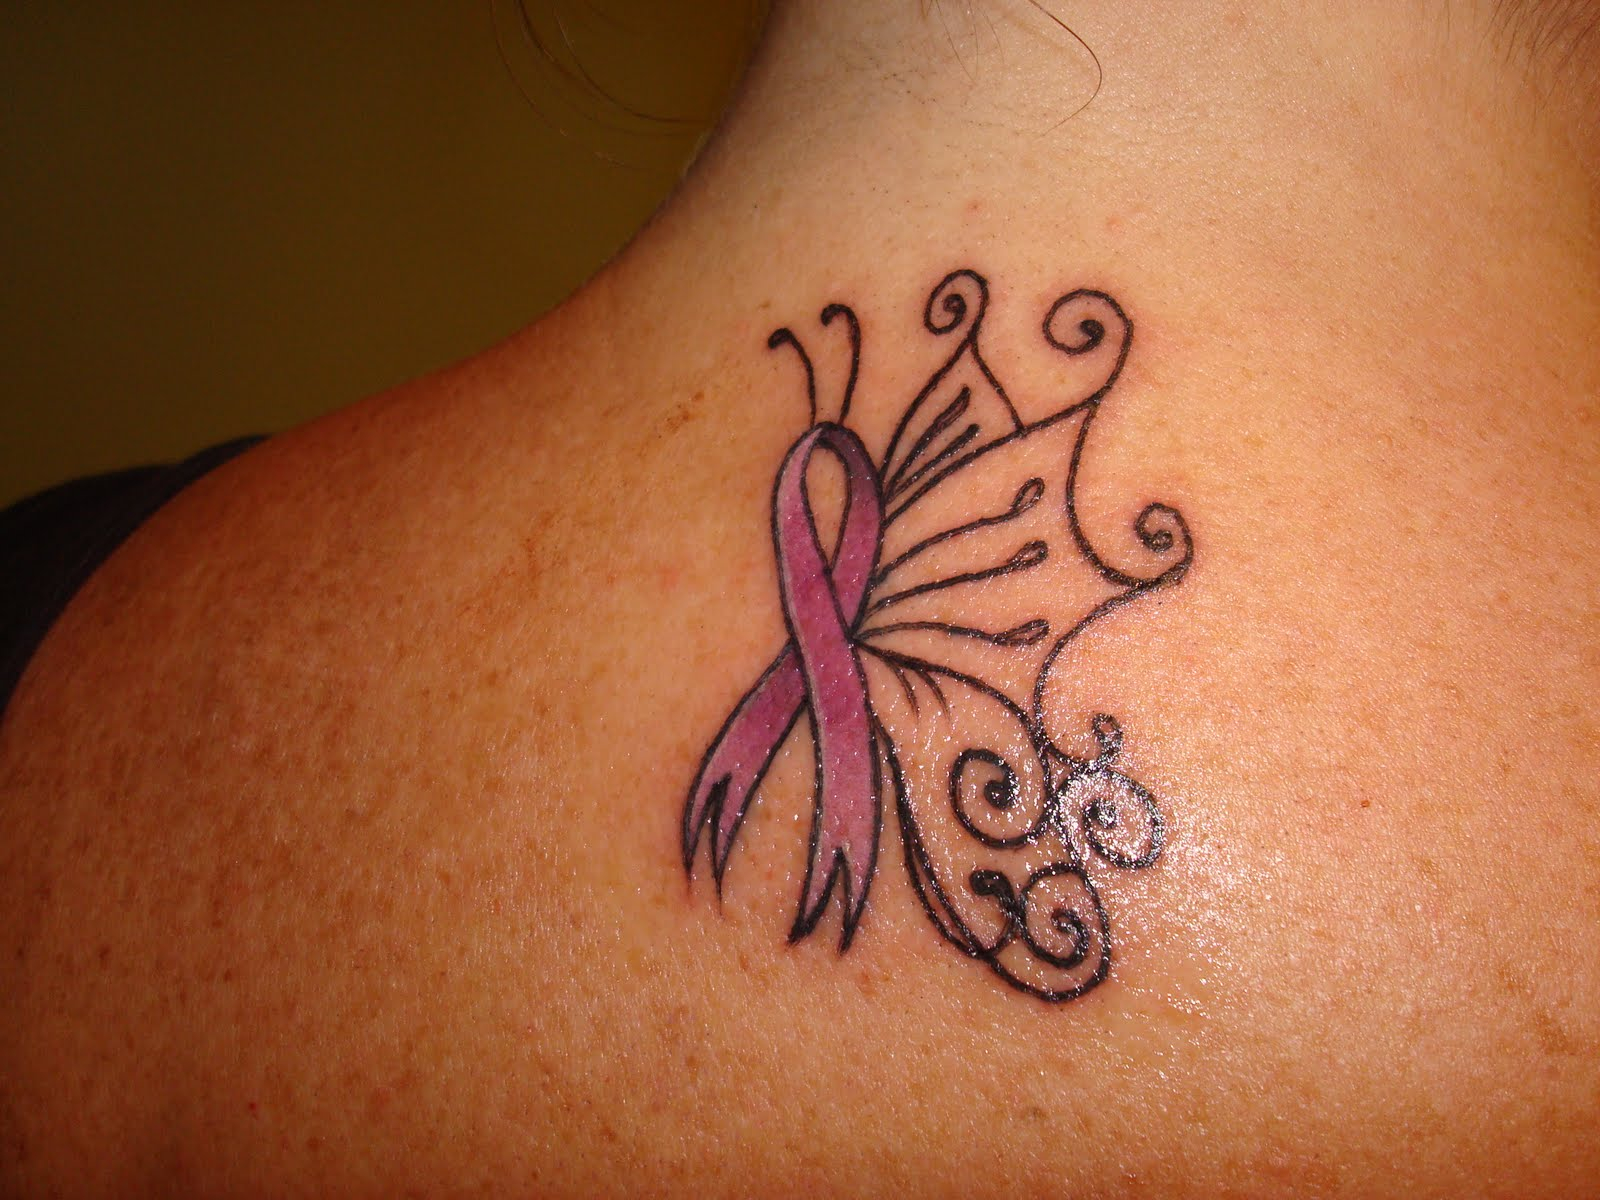 Nape Cancer Ribbon Butterfly Tattoo intended for dimensions 1600 X 1200